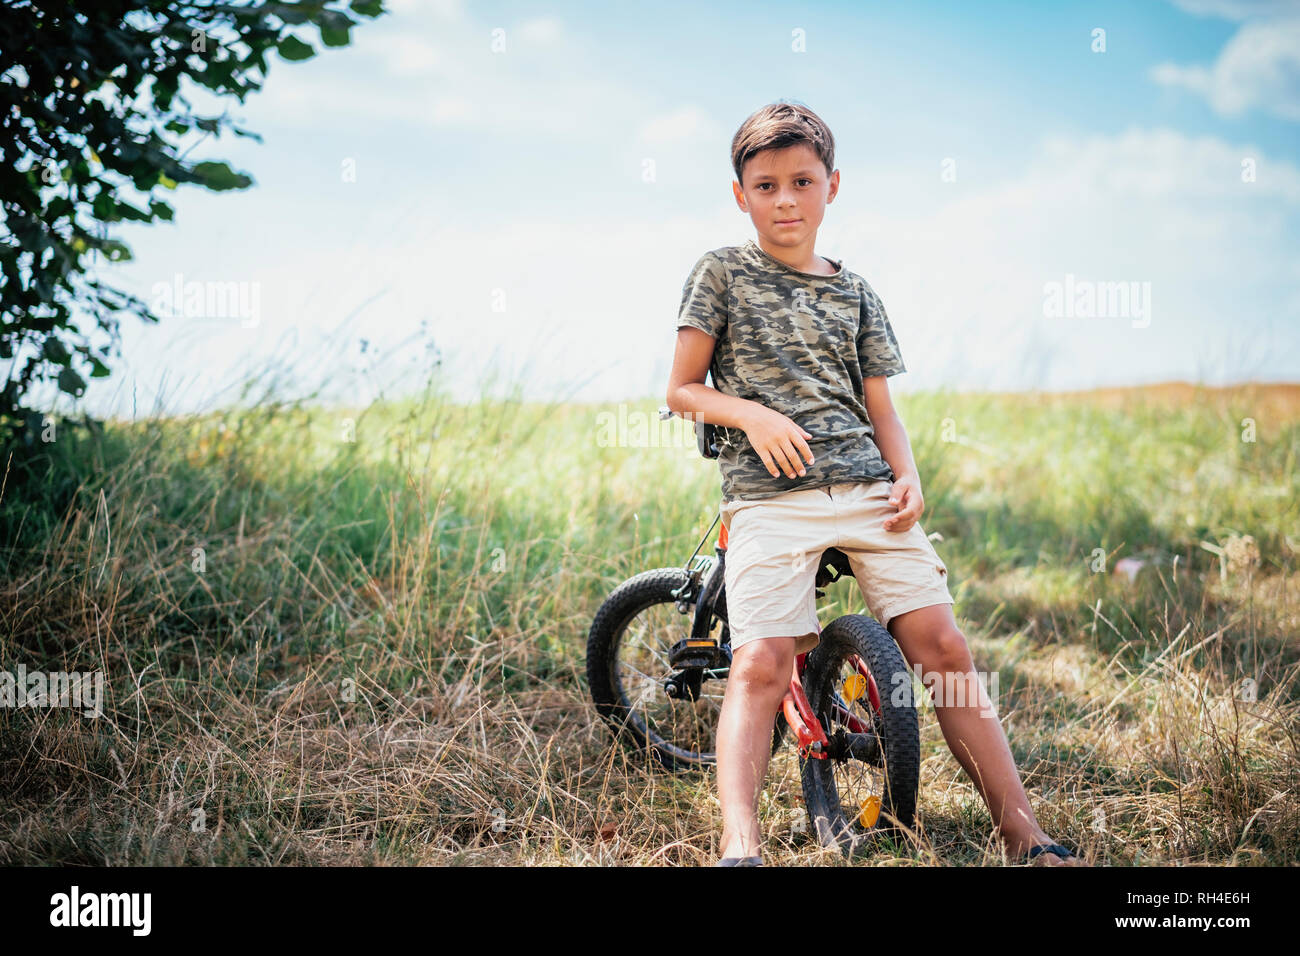 Portrait confident boy on bicycle in rural field Stock Photo